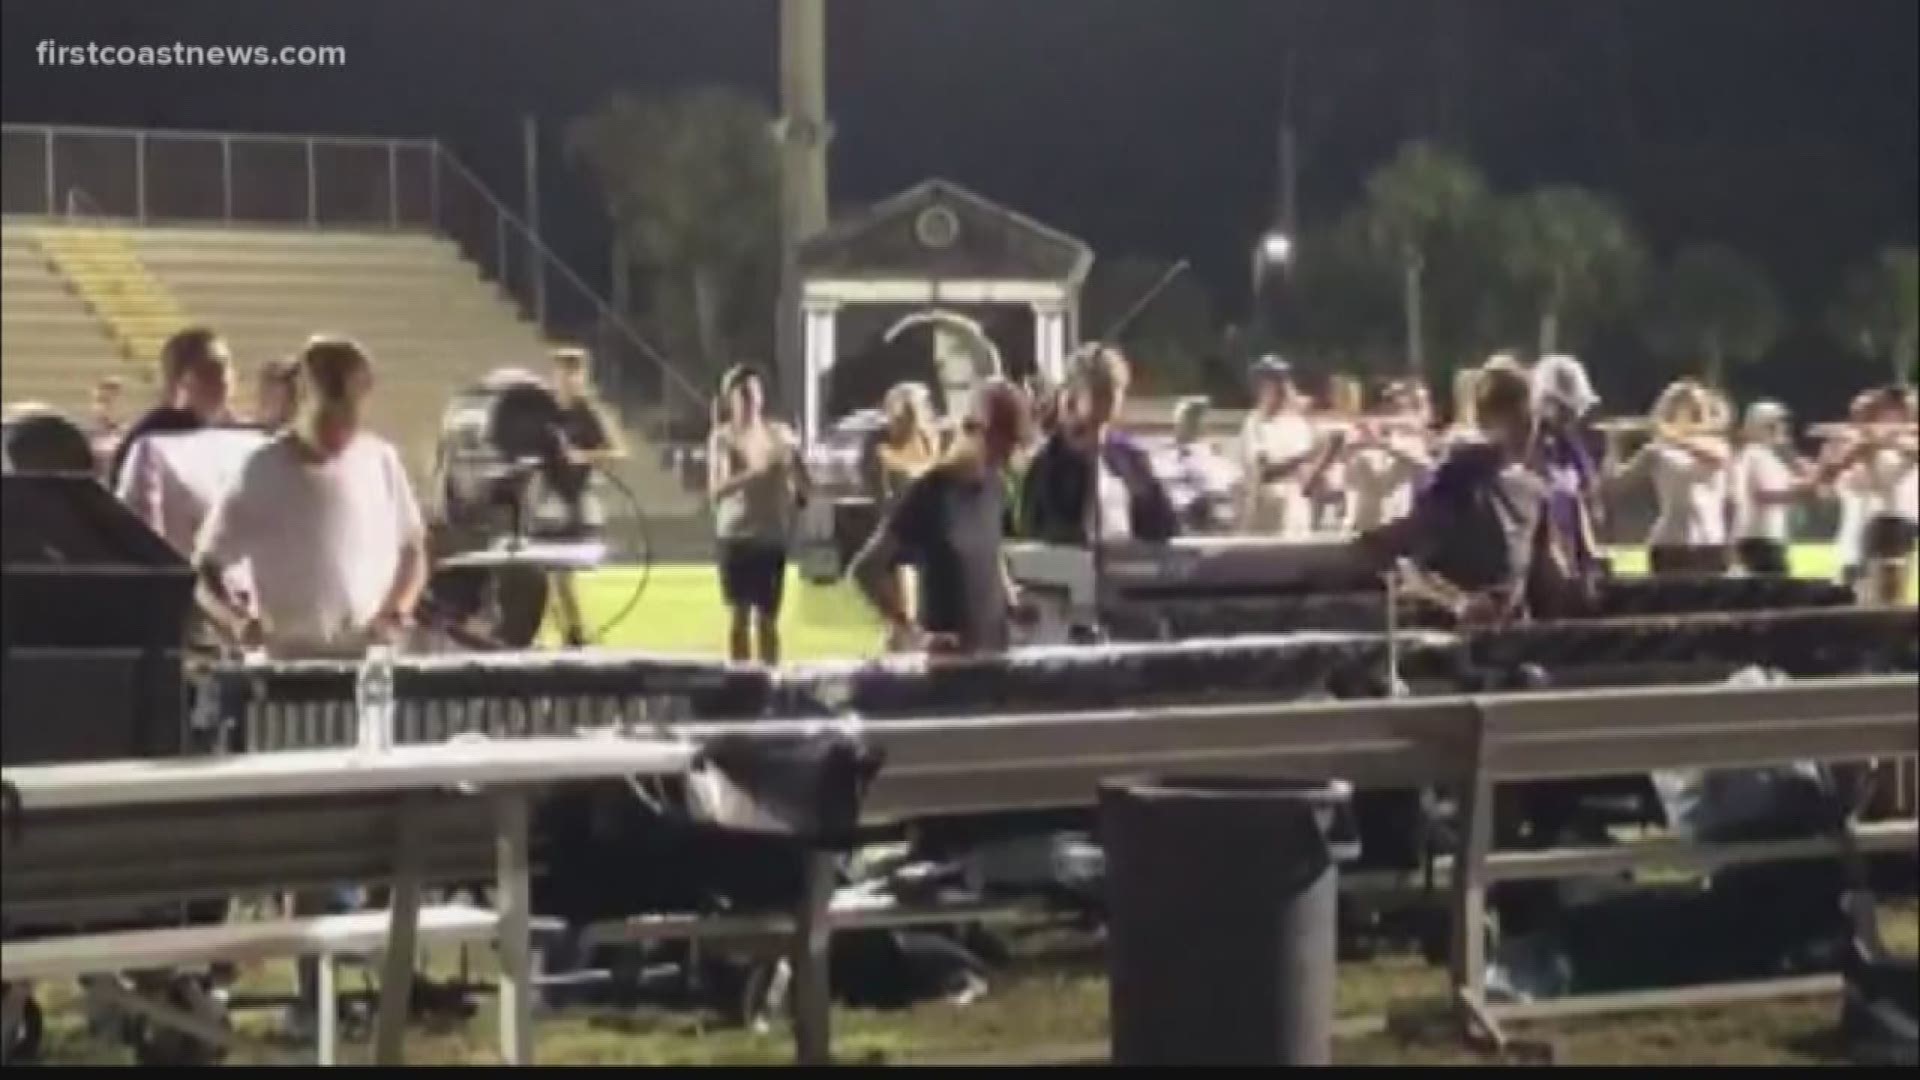 After struggling to keep their instruments together with duct tape, members of the Fletcher High School marching band now have some brand new instruments to play.